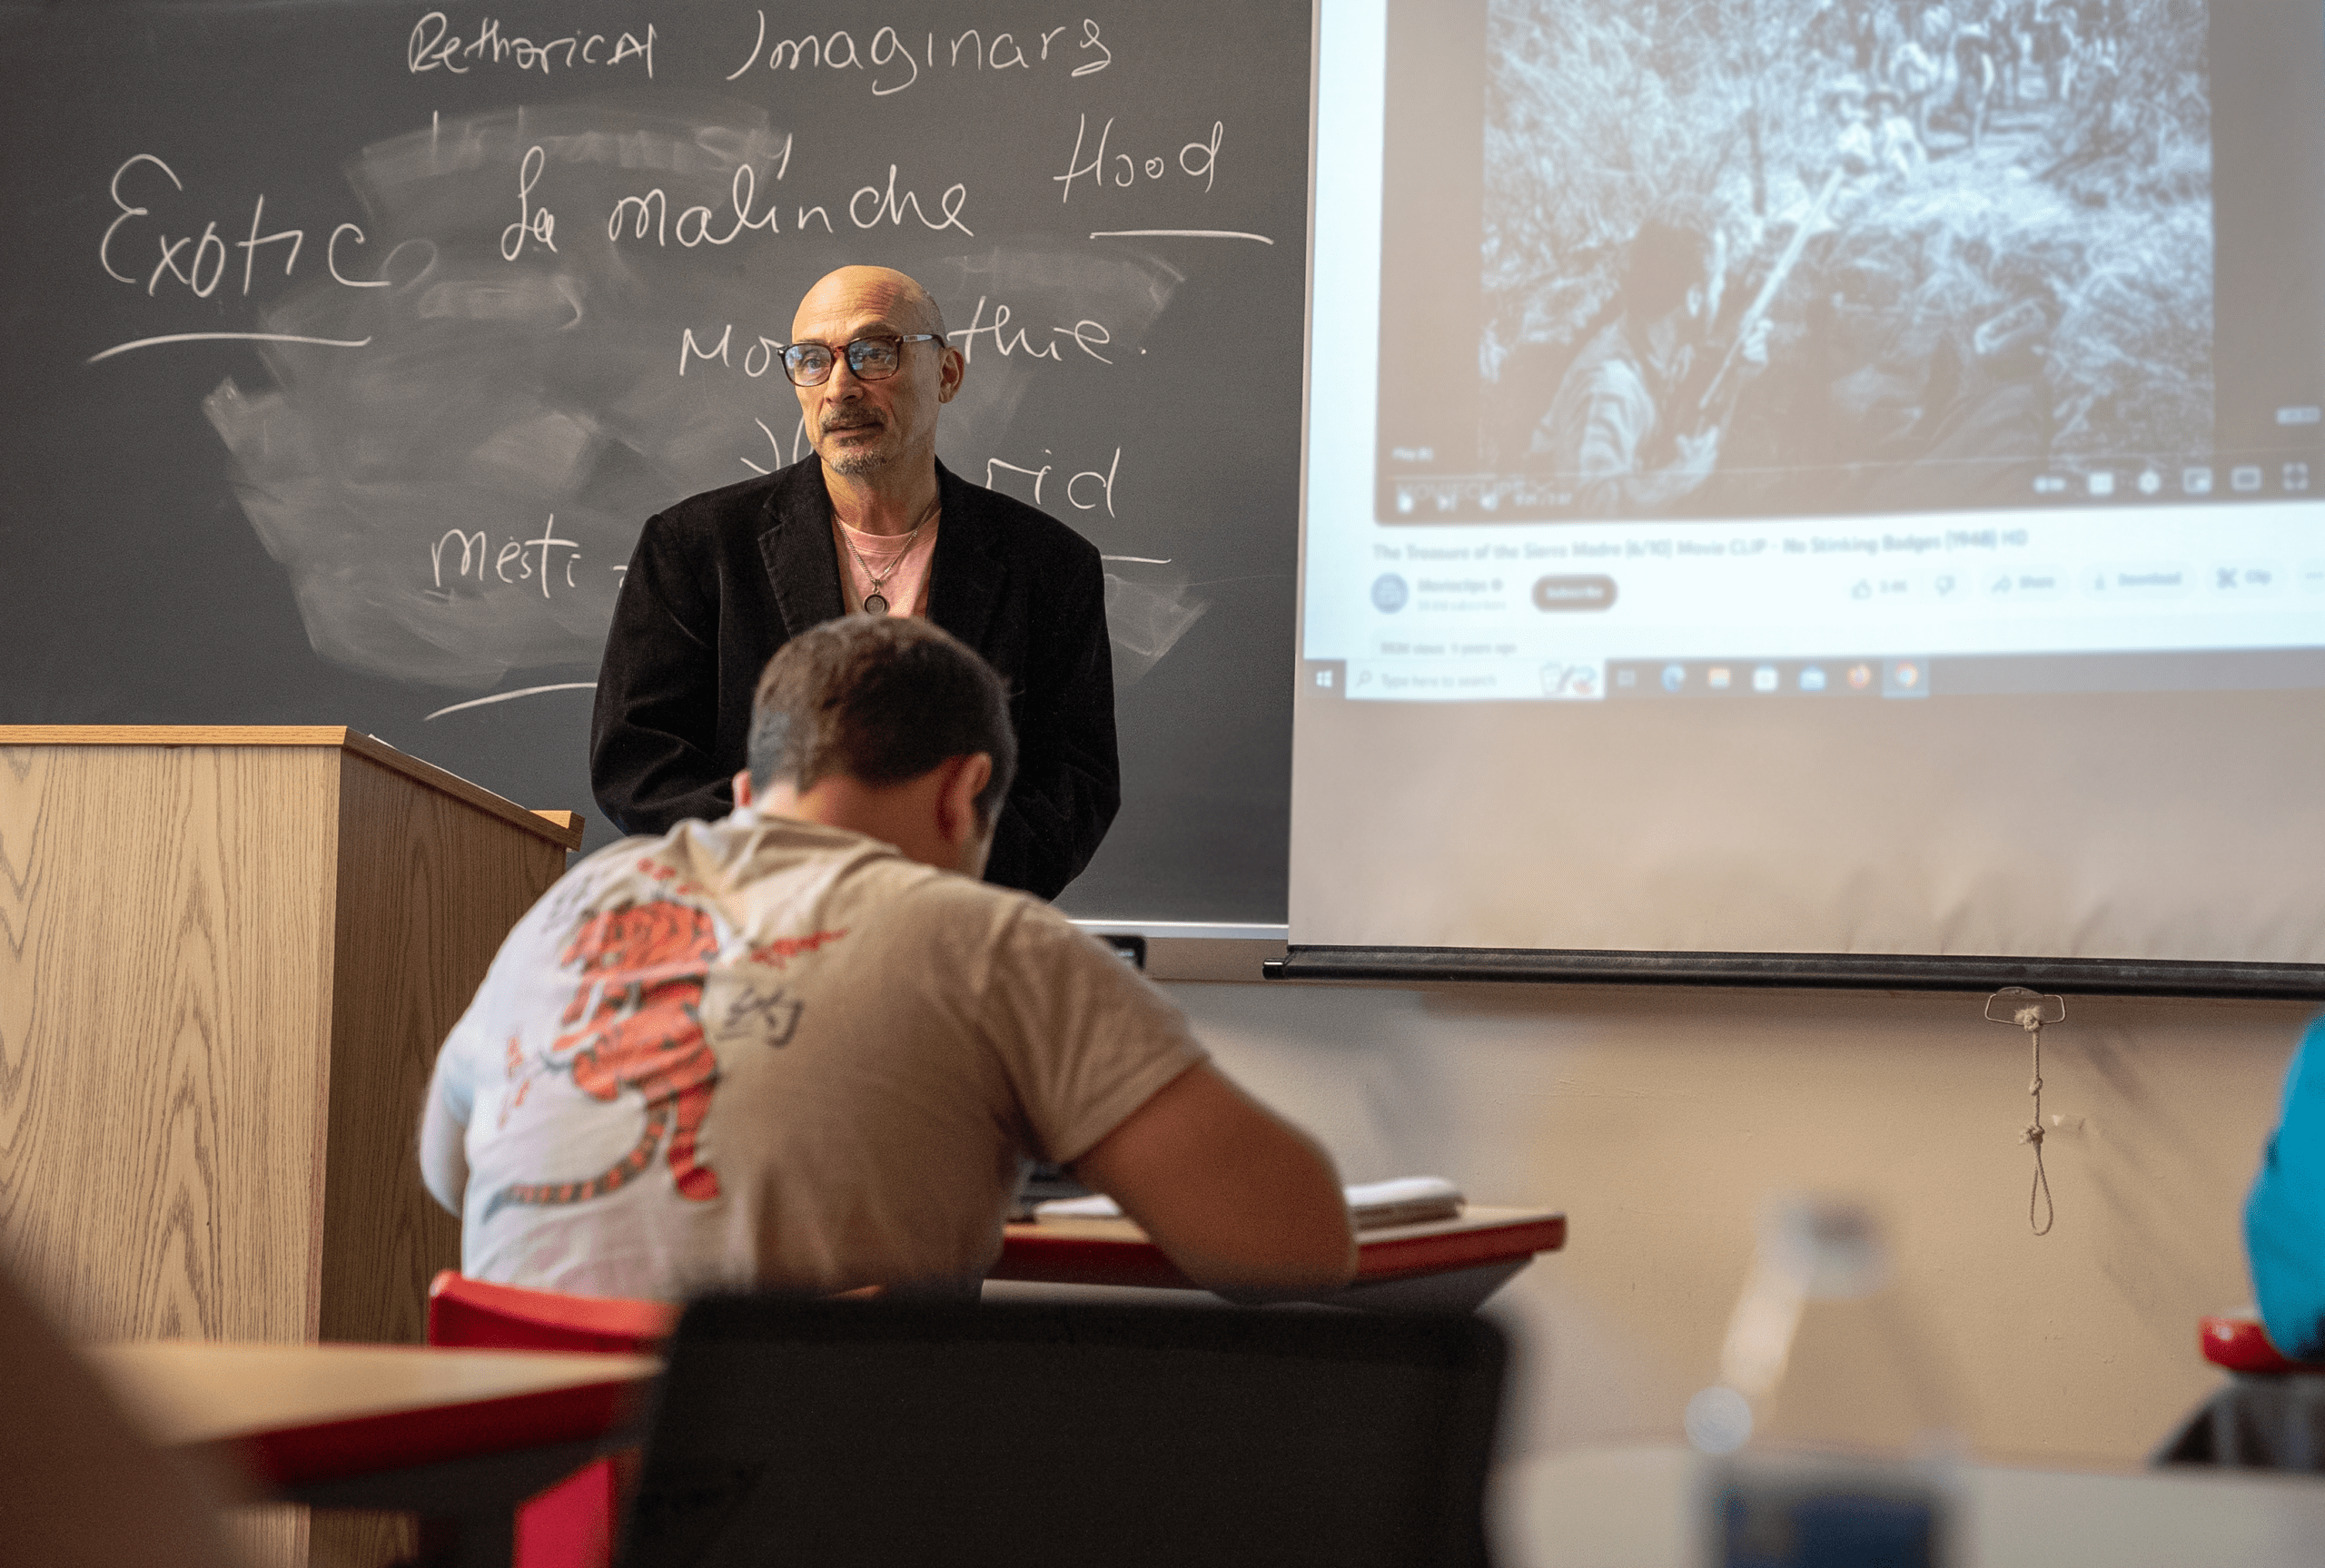 Professor Baretto teaching in classroom with screen showing black and white video in background